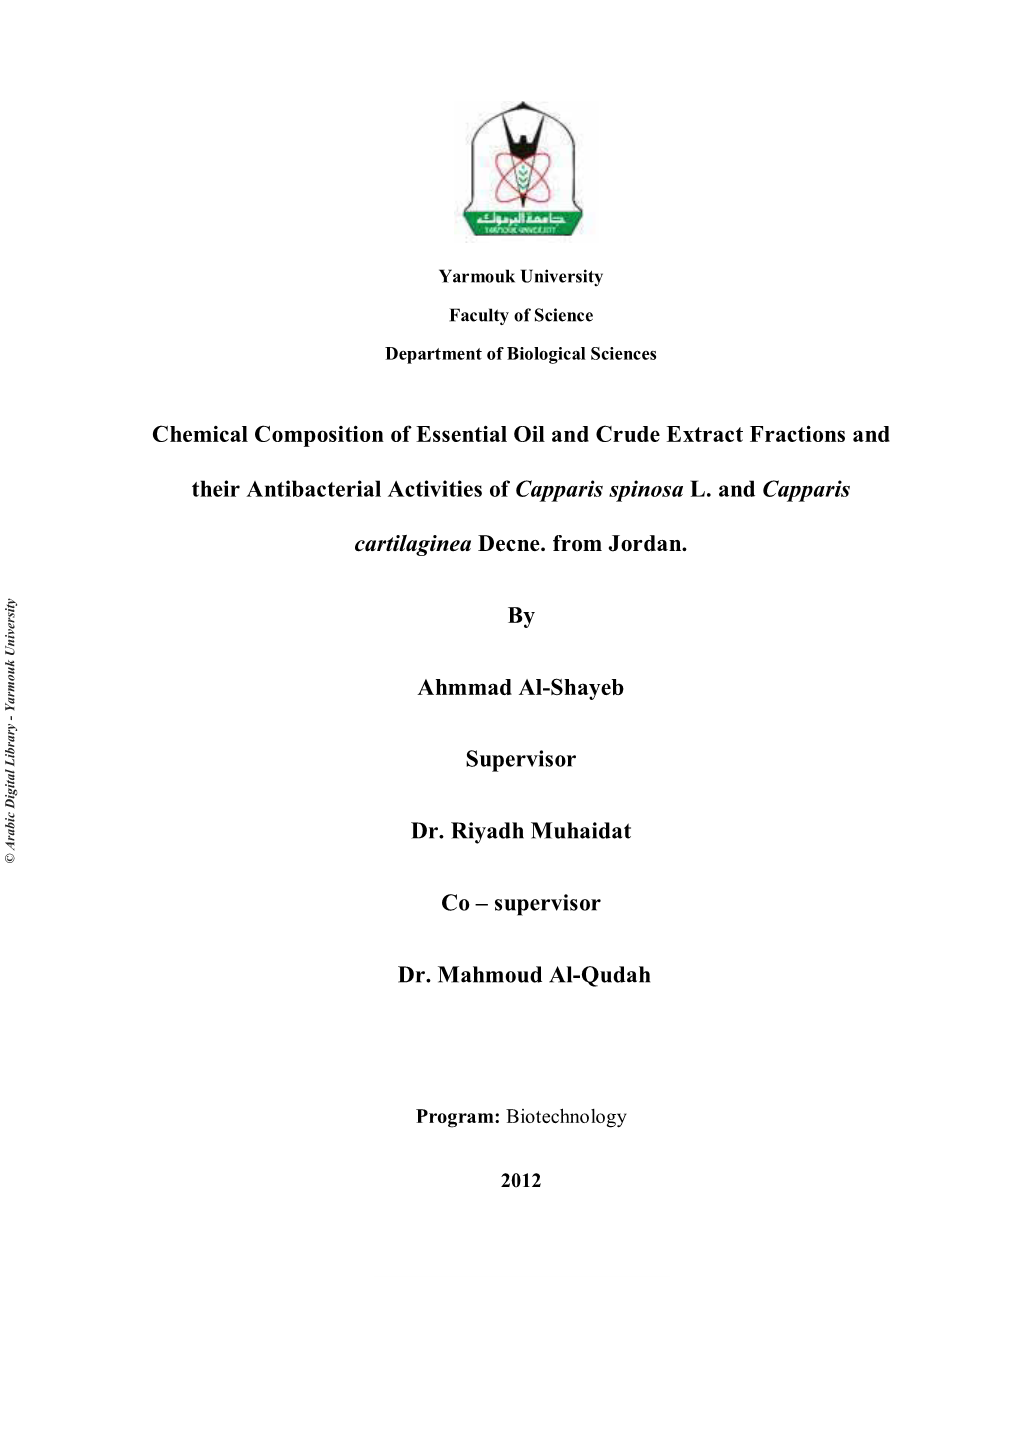 Chemical Composition of Essential Oil and Crude Extract Fractions And